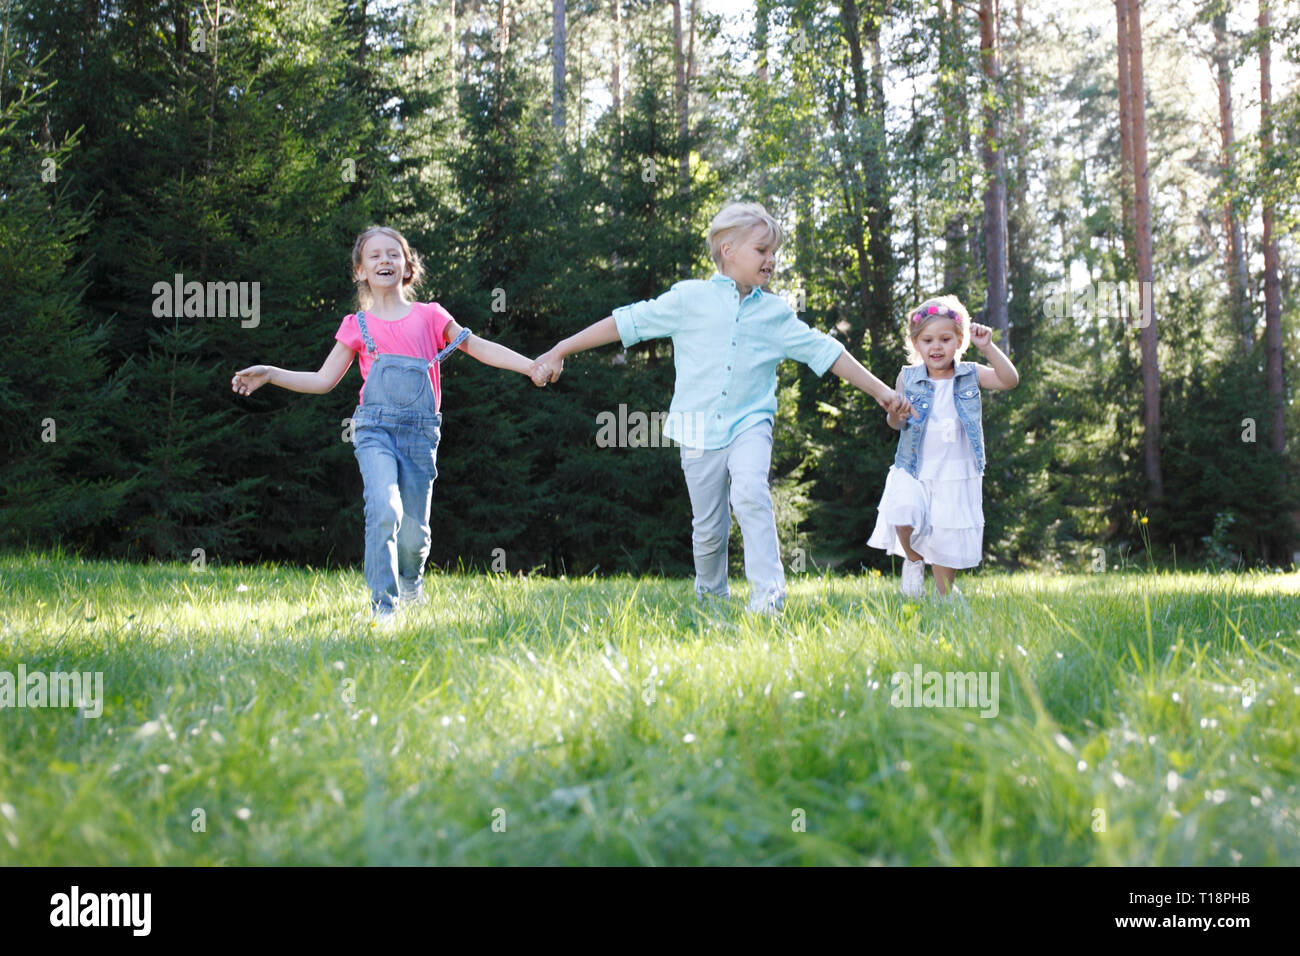 Group of young children running towards camera in park Stock Photo